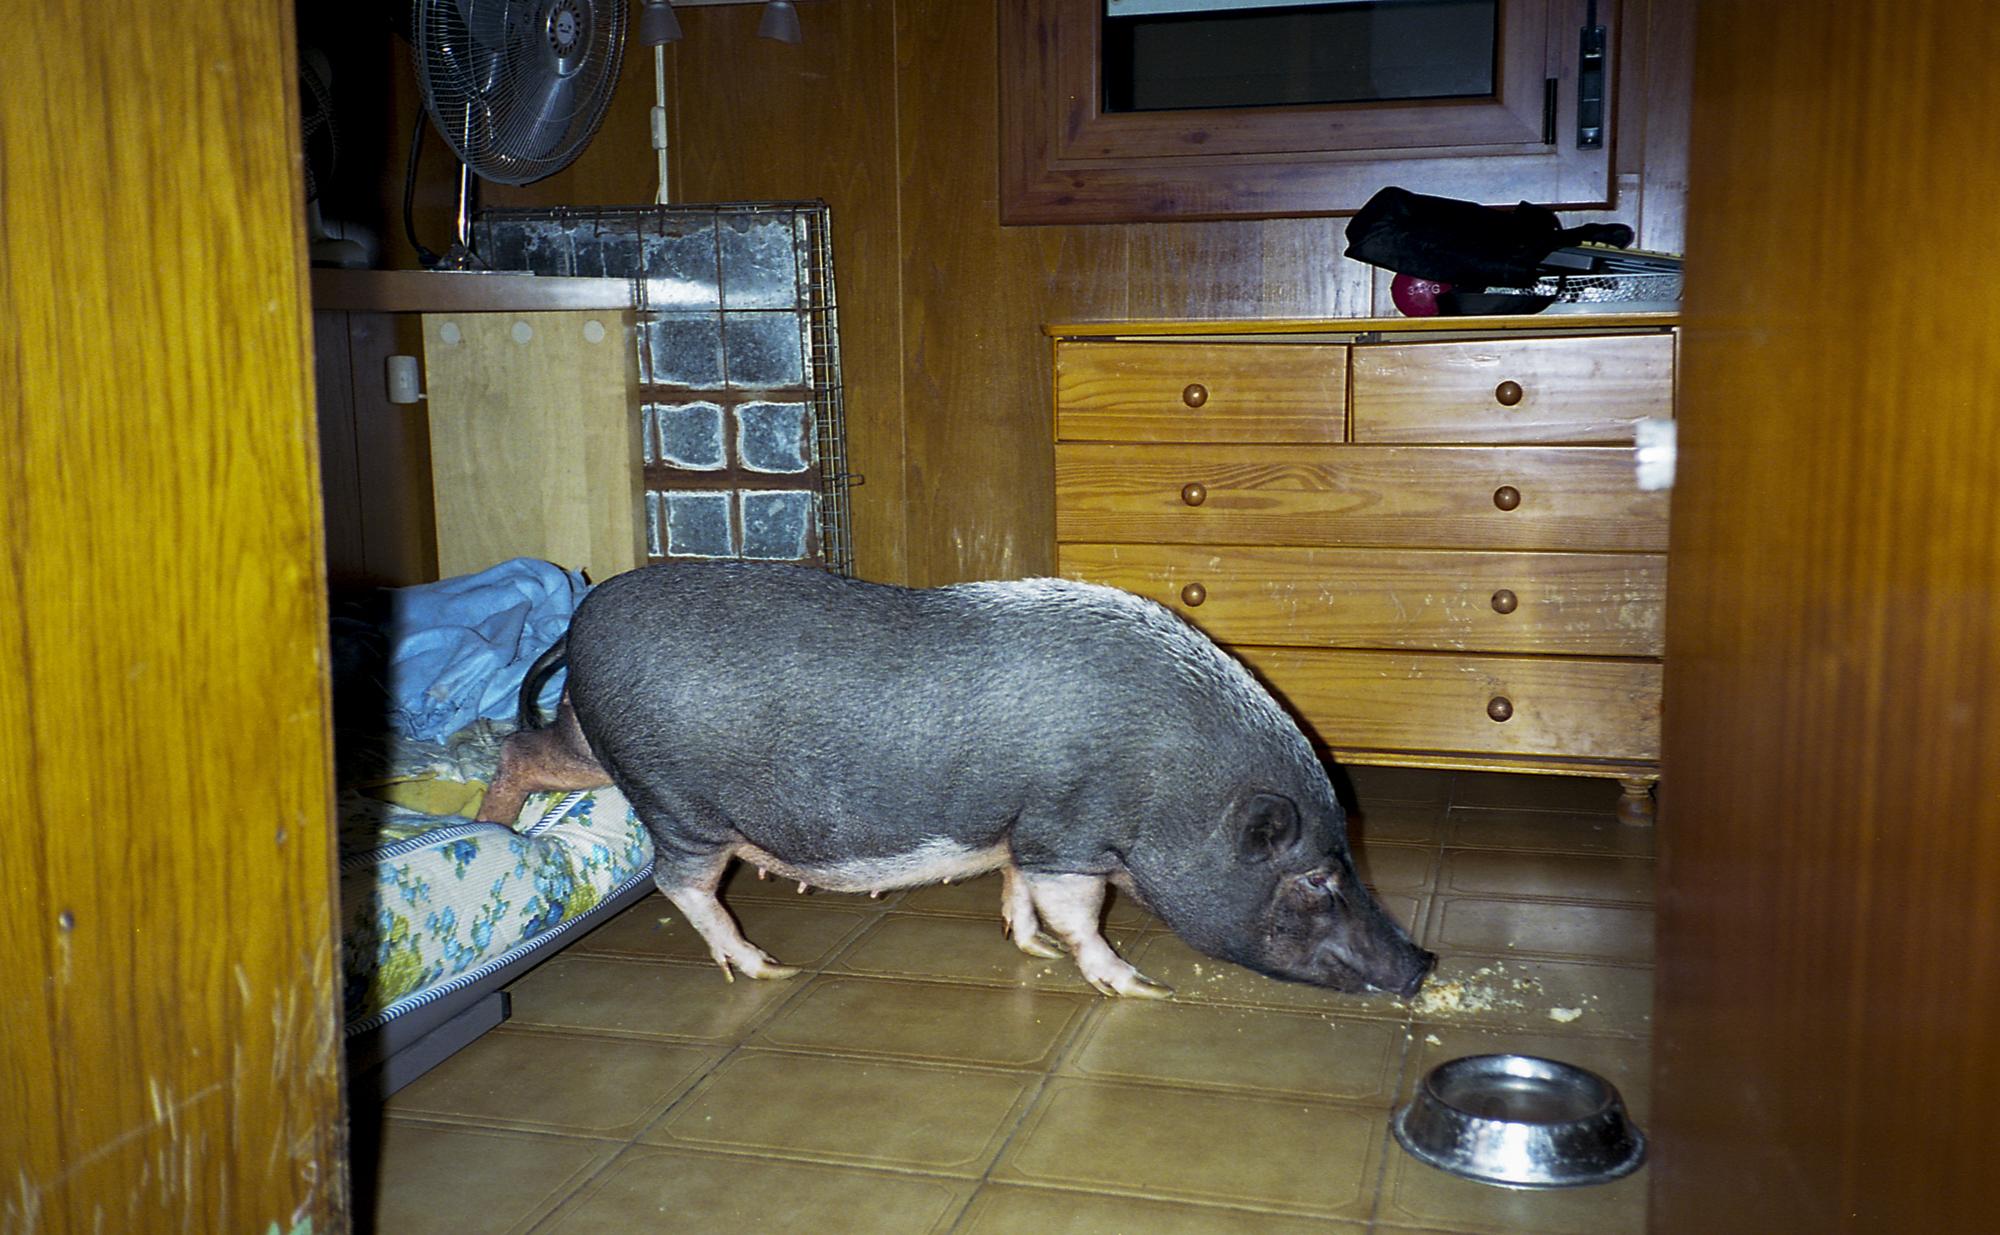 Porky the pig meanders accross the room to eat her dinner. Porky occupies a whole room in...